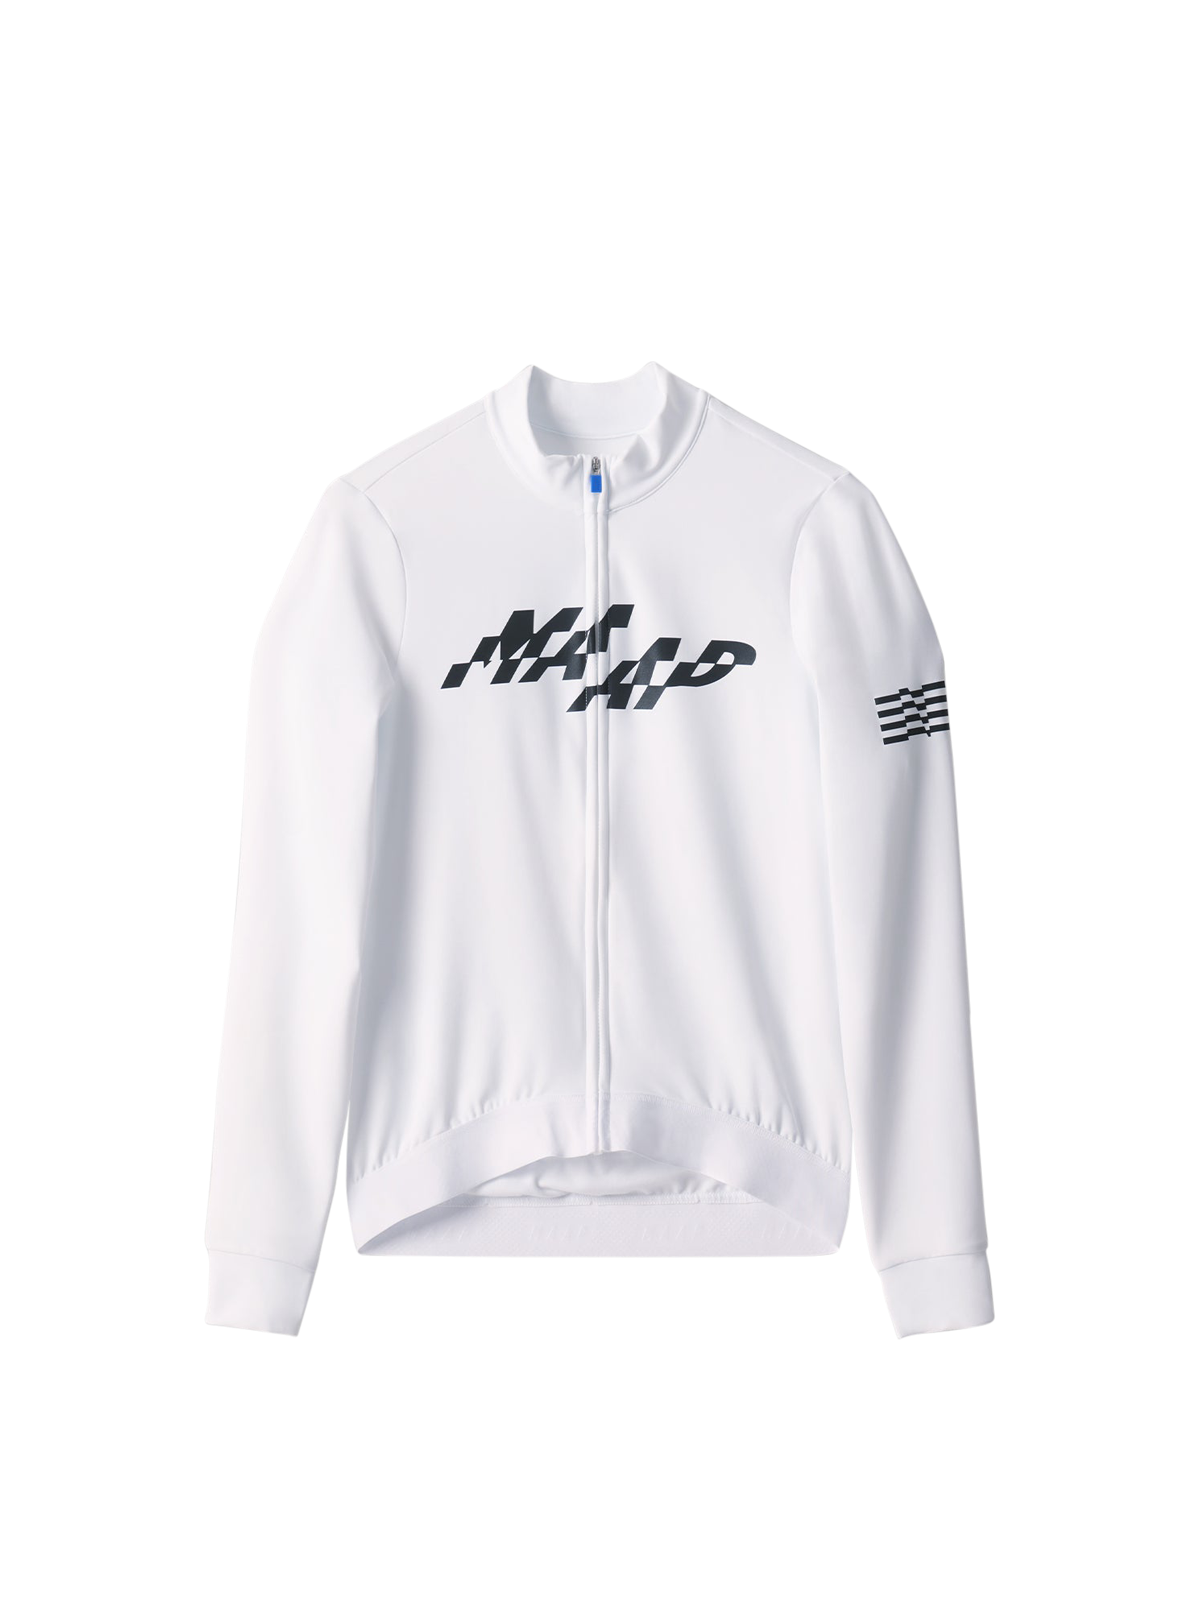 Women's Fragment Thermal LS Jersey 2.0 - MAAP Cycling Apparel